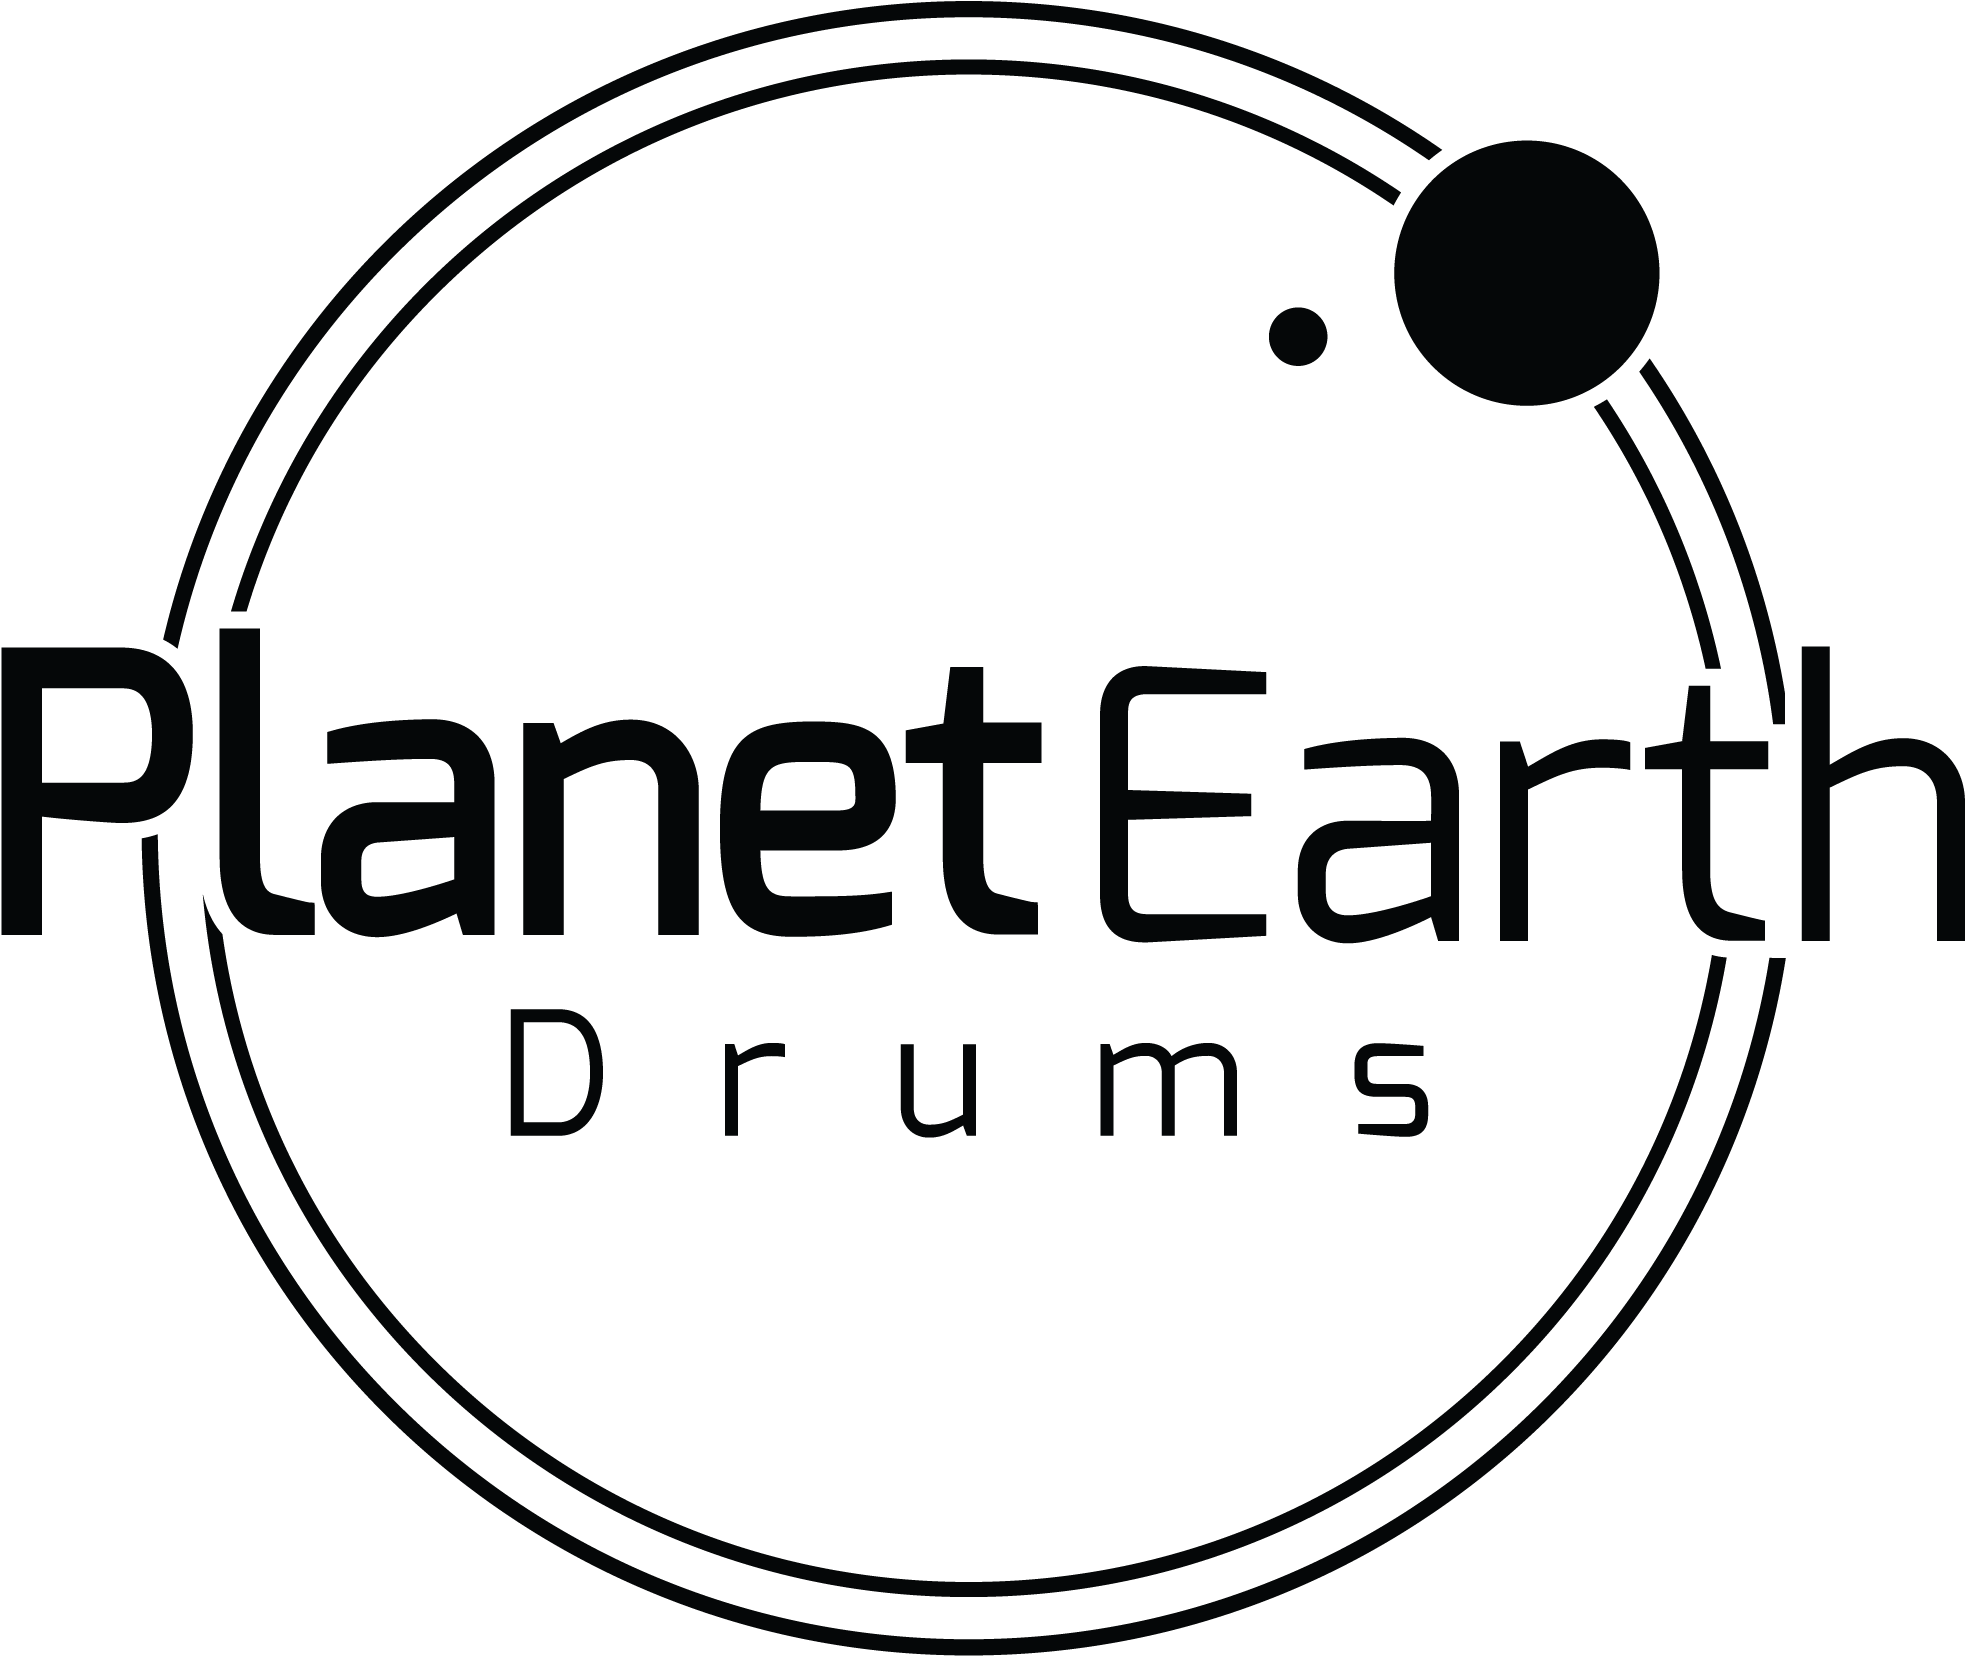 Planet Earth Drums - Planet Earth (2158x2158)